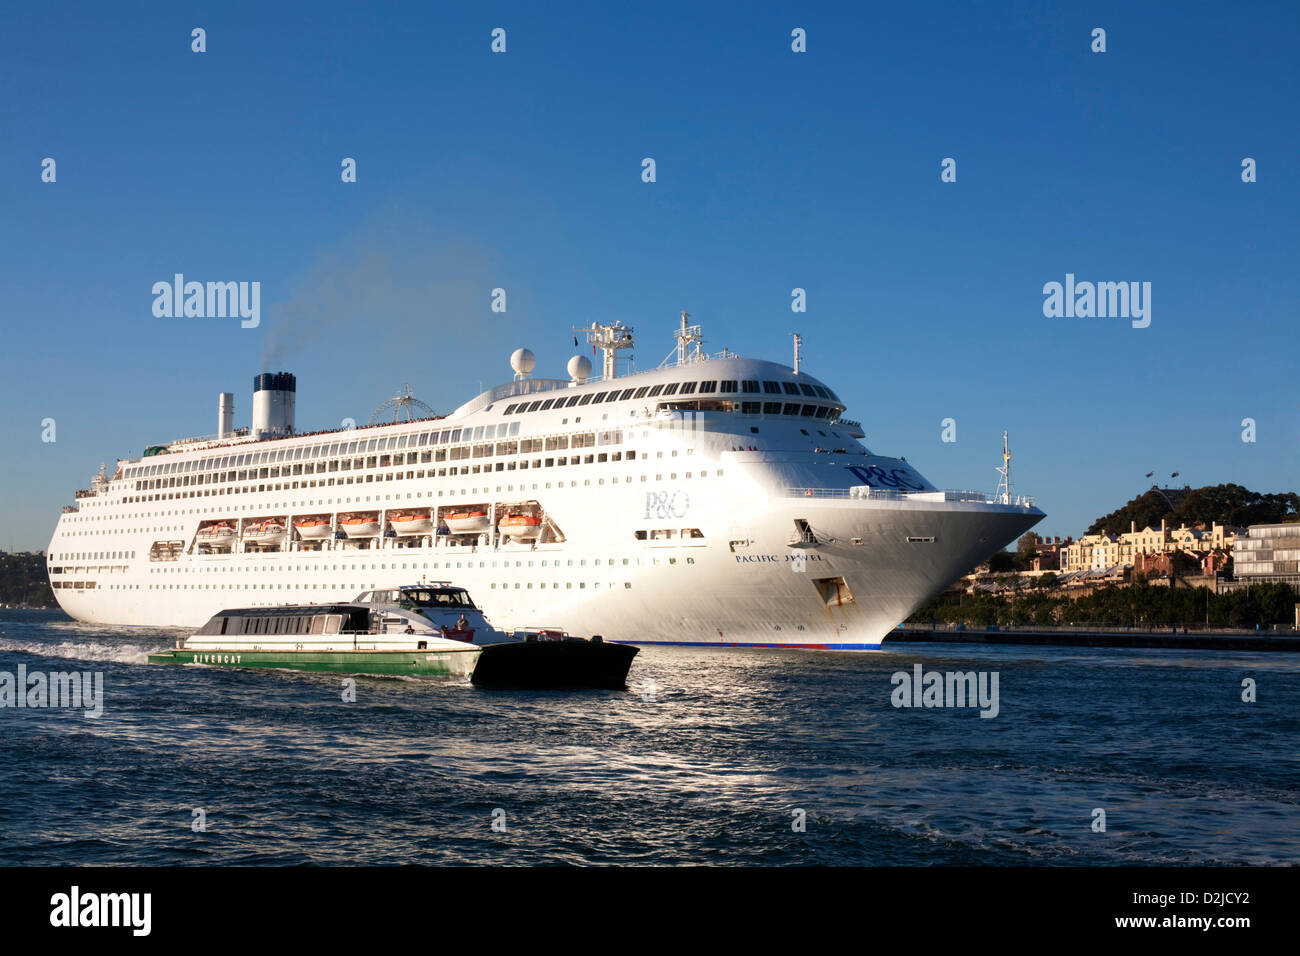 Sydney Harbour Ferry passing P&O Cruises superliner Pacific Jewel Cruise Ship as she departs from Sydney Australia Stock Photo